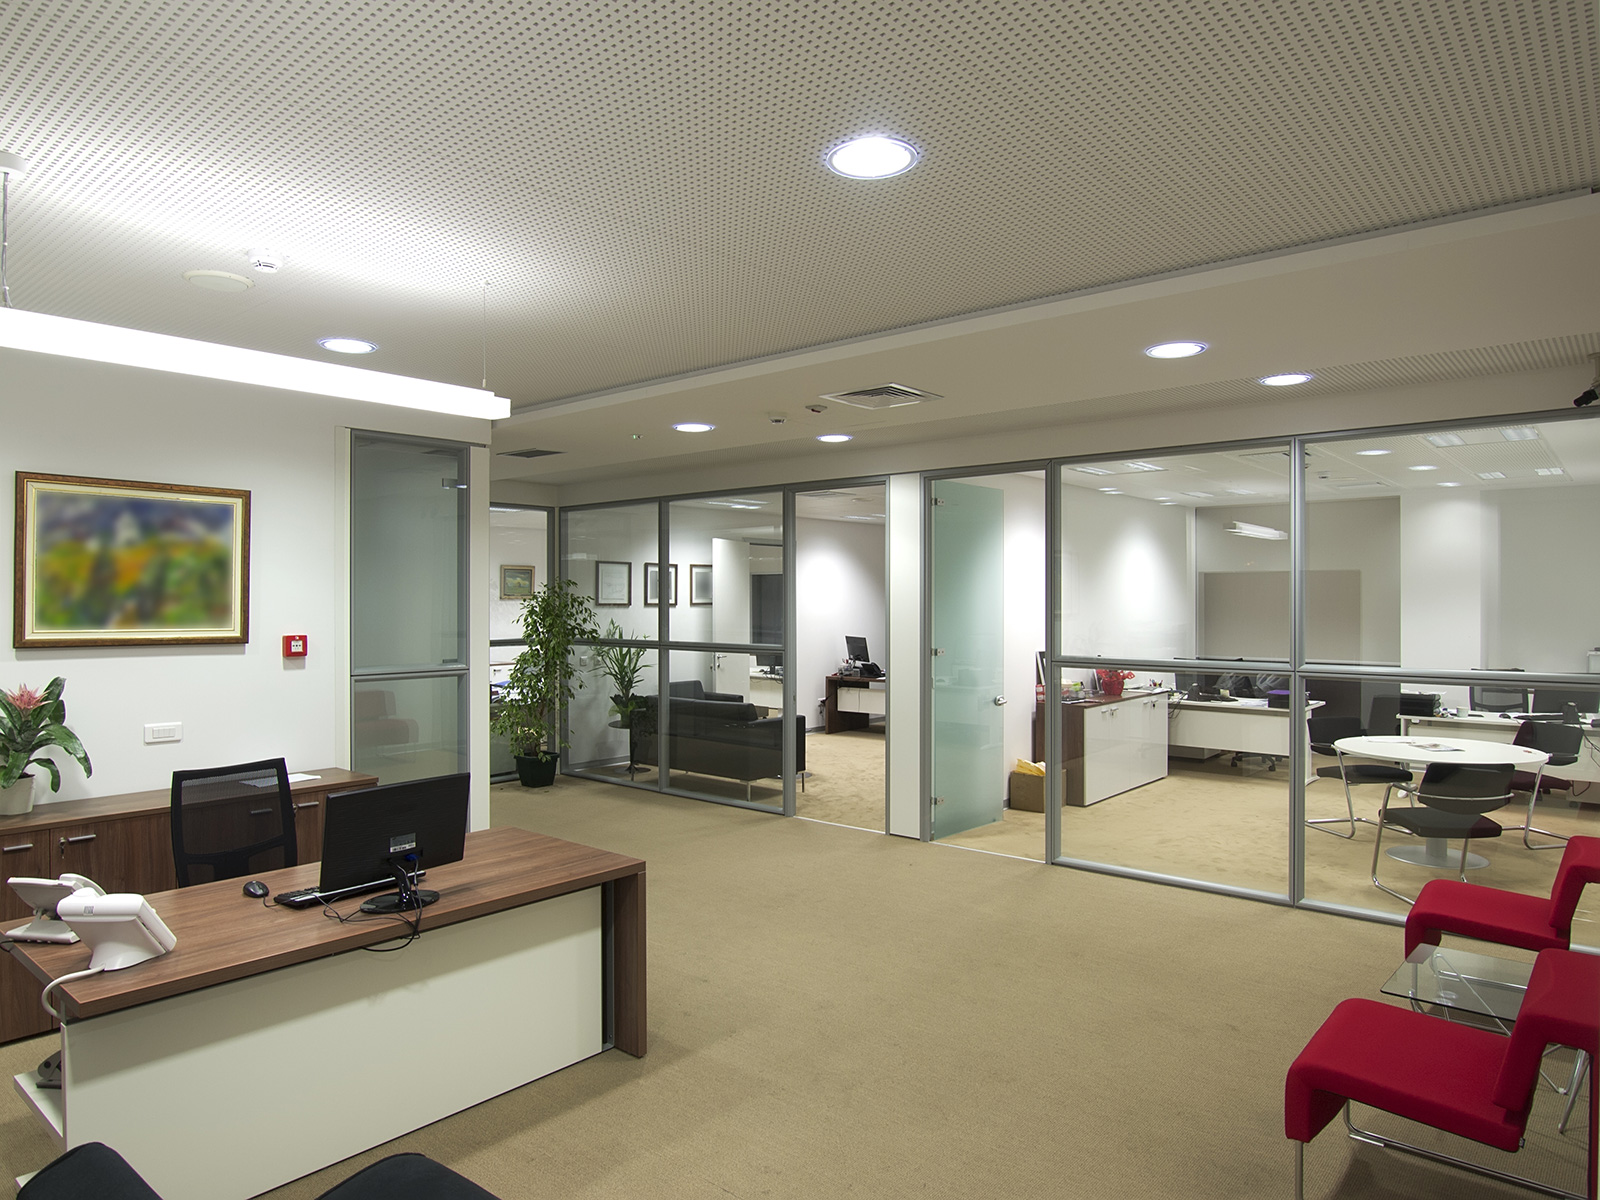 Office Partitioning Systems